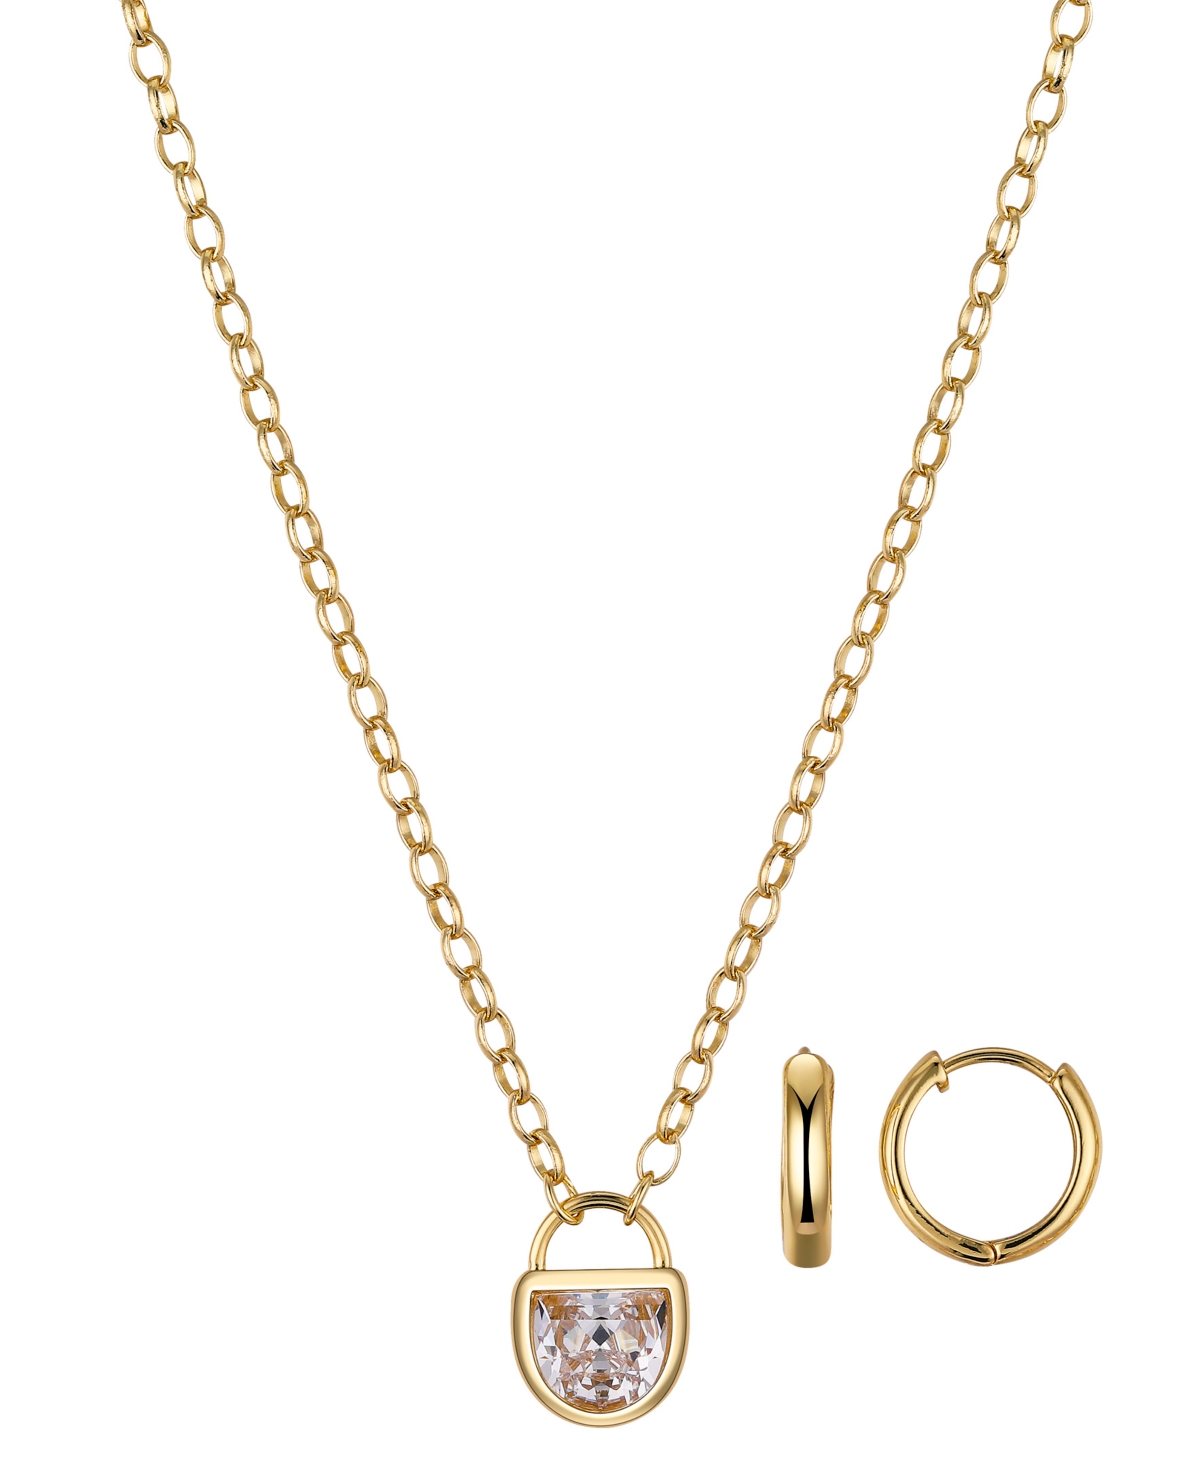 Cubic Zirconia Lock Pendant Necklace and Earring Set - Gold